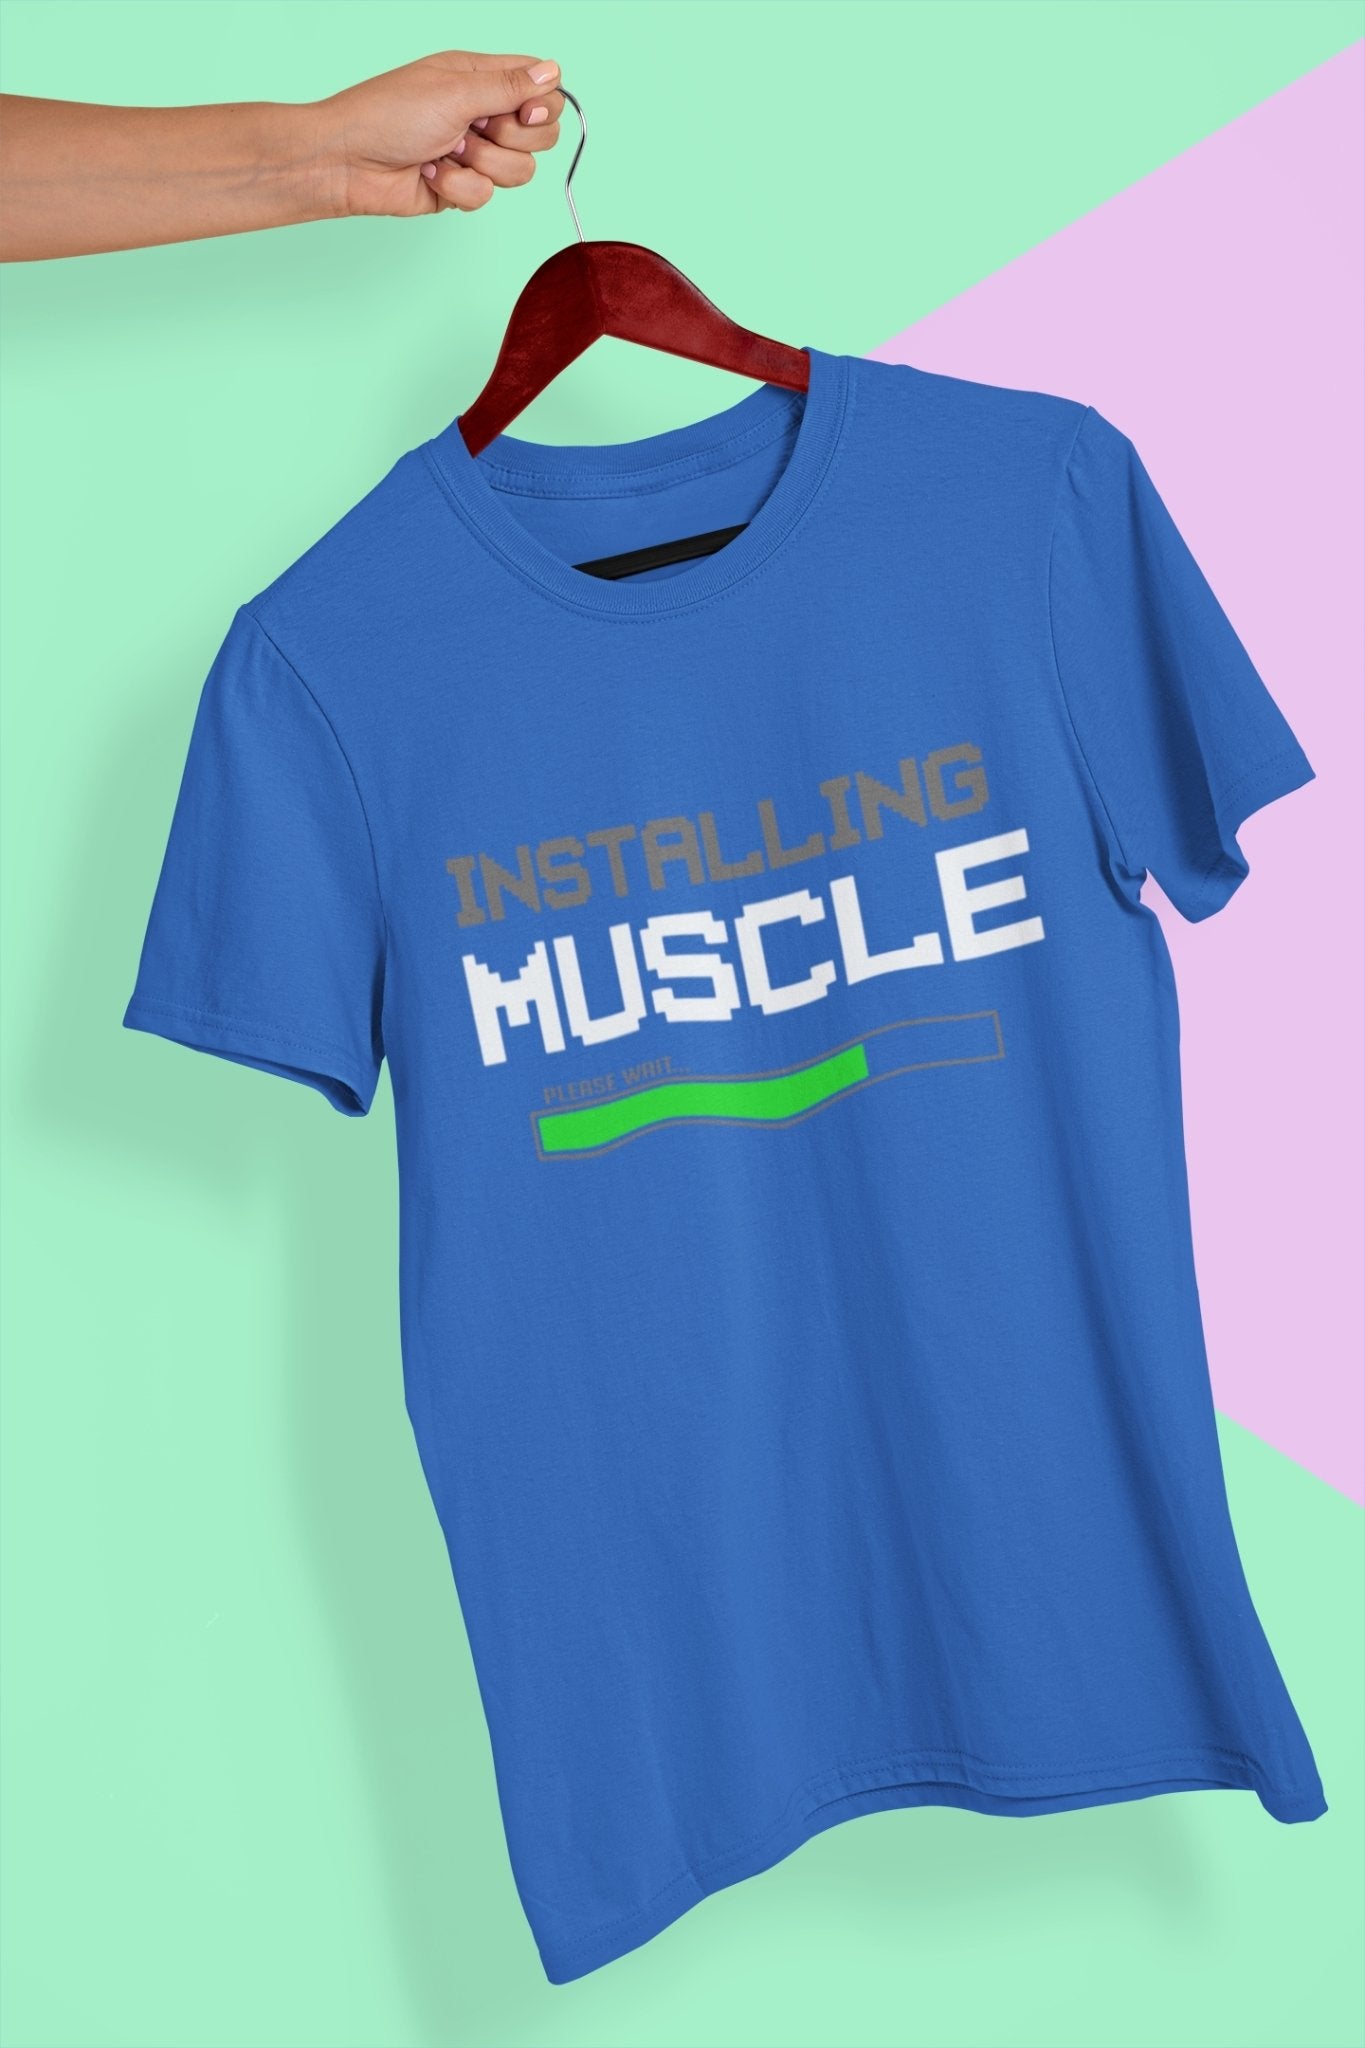 Installing Muscles Gym And Workout Mens Half Sleeves T-shirt- FunkyTeesClub - Funky Tees Club